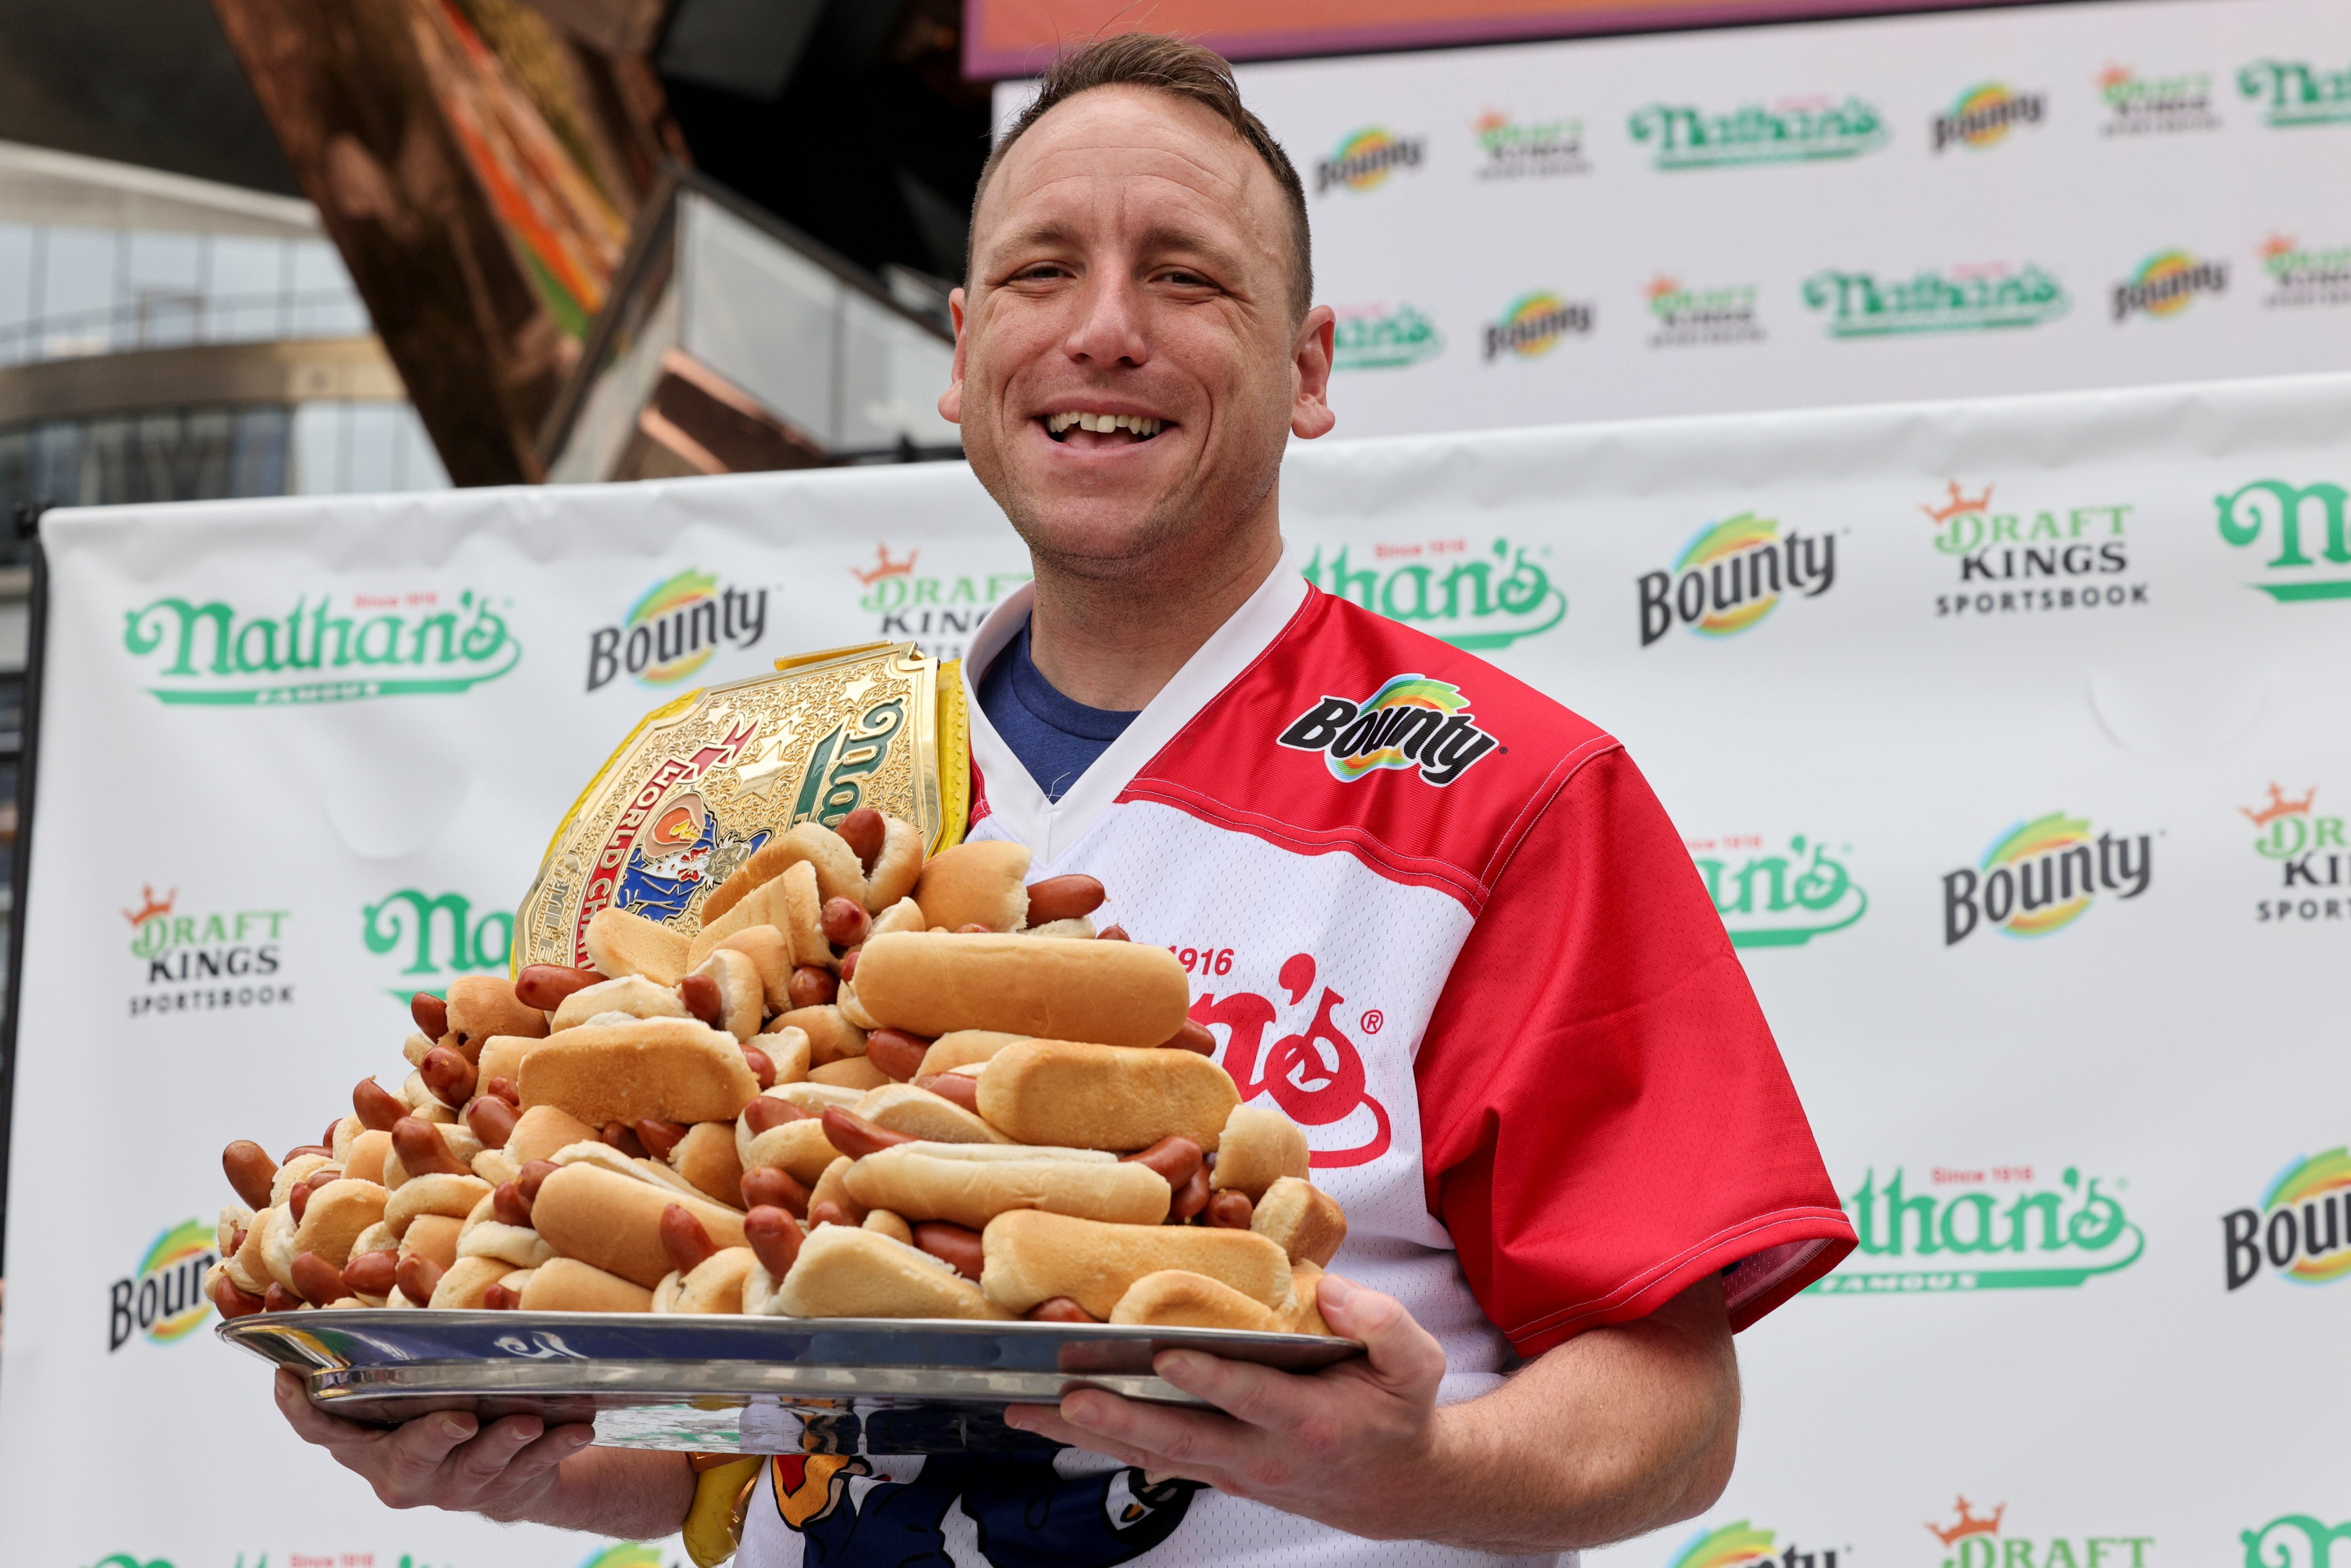 Nathan’s Famous hot dog-eating contest champion Joey Chestnut at the official weigh-in ceremony in Manhattan, New York last year. Photo: Reuters